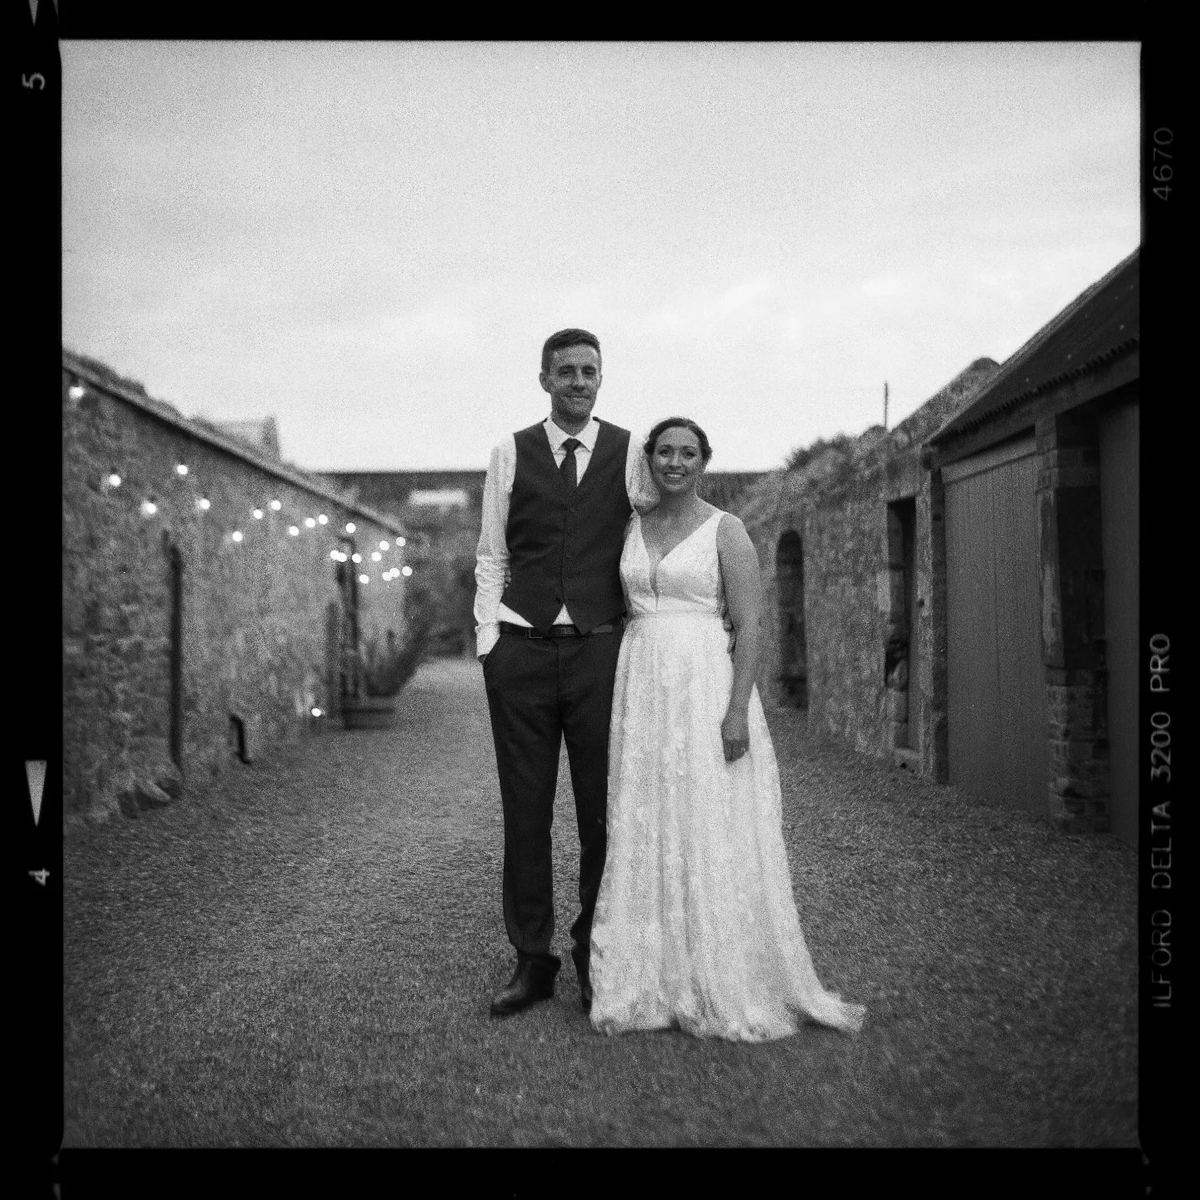 Black and white image of a couple getting married